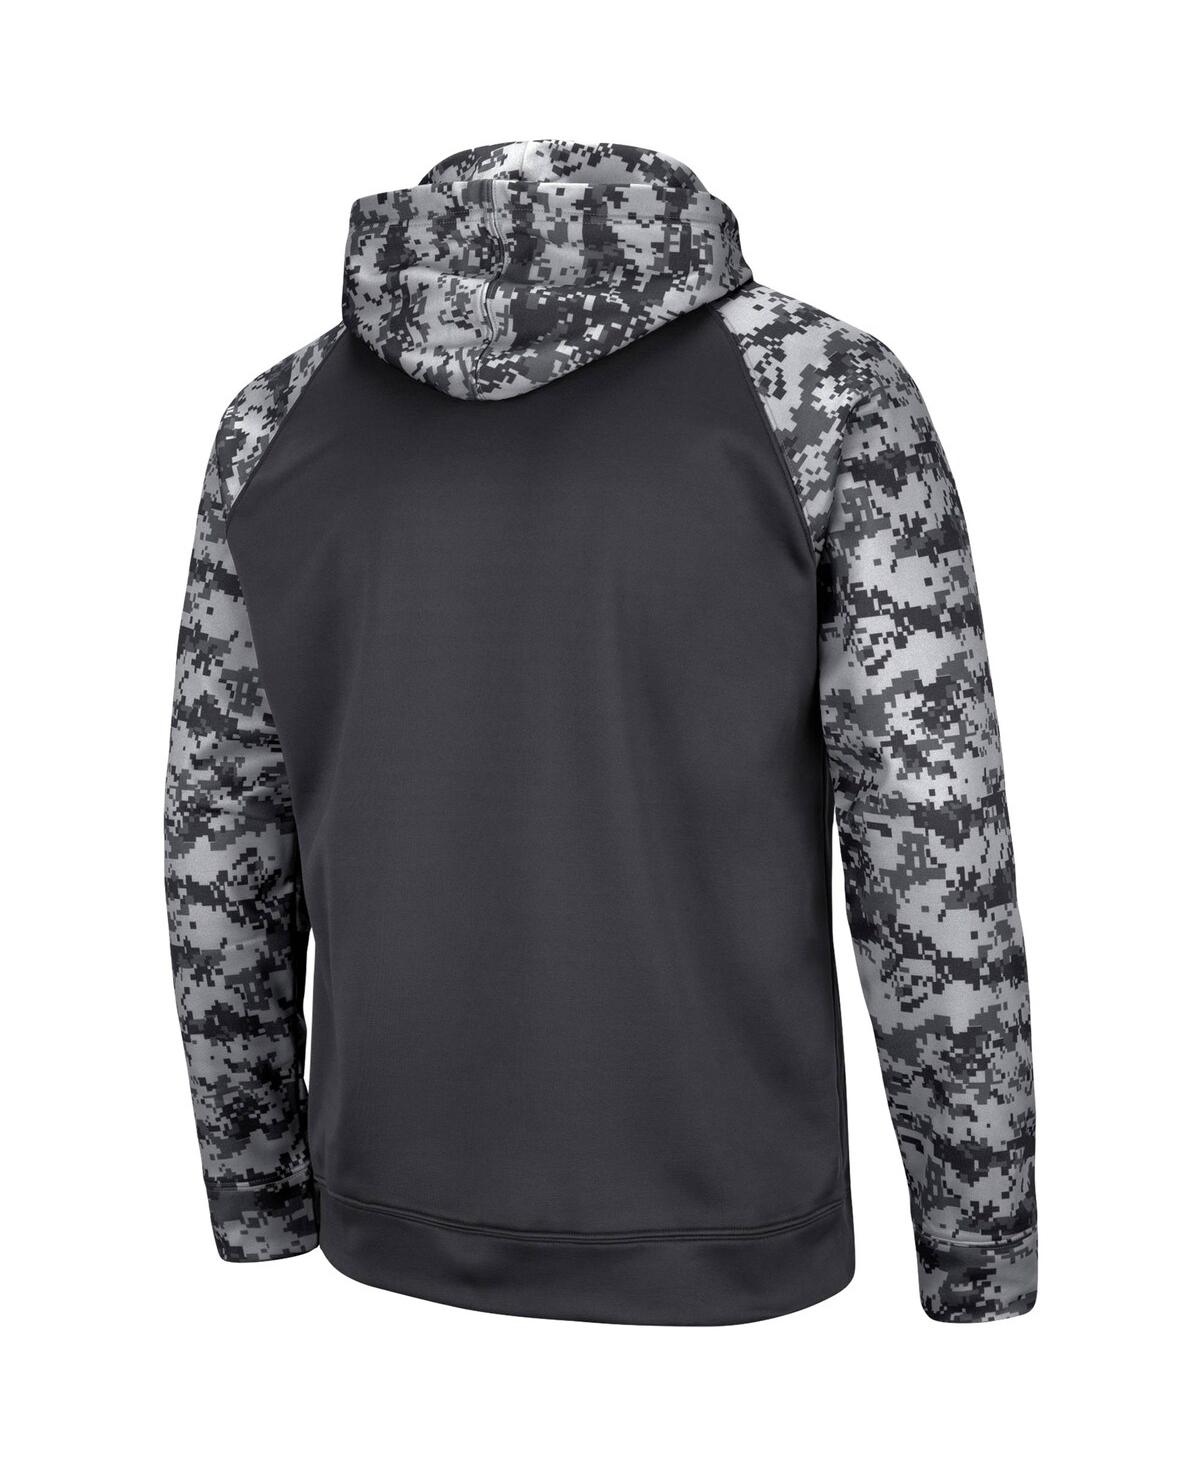 Shop Colosseum Men's  Charcoal Utah State Aggies Oht Military-inspired Appreciation Digital Camo Pullover